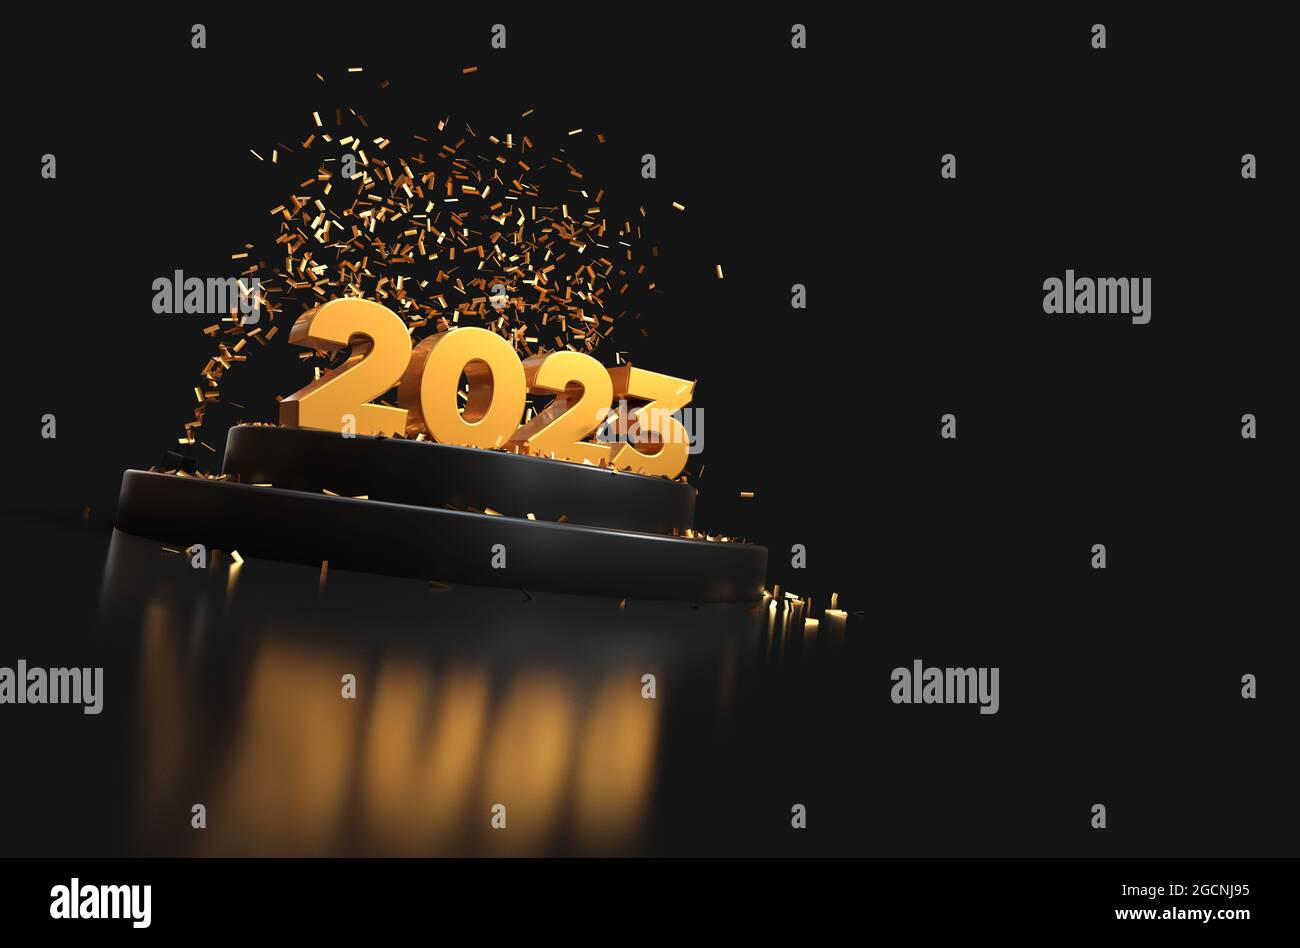 happy new year 2023 - 3D rendering - gold and black colors Stock Photo